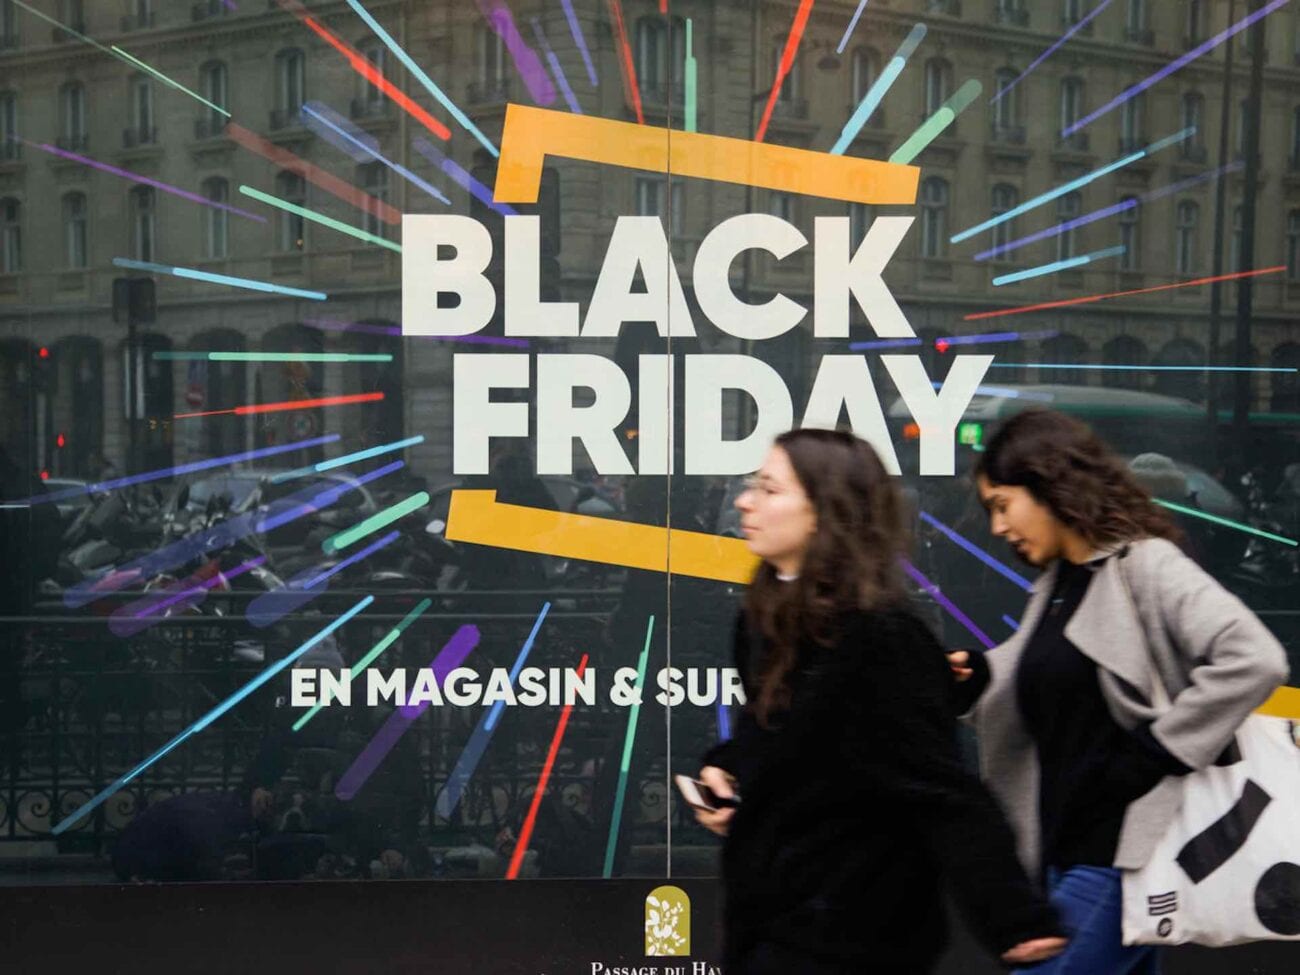 Black Friday is a capitalist holiday tradition, but will 2020 disrupt the day of consumerism? Here's what's happening in France.